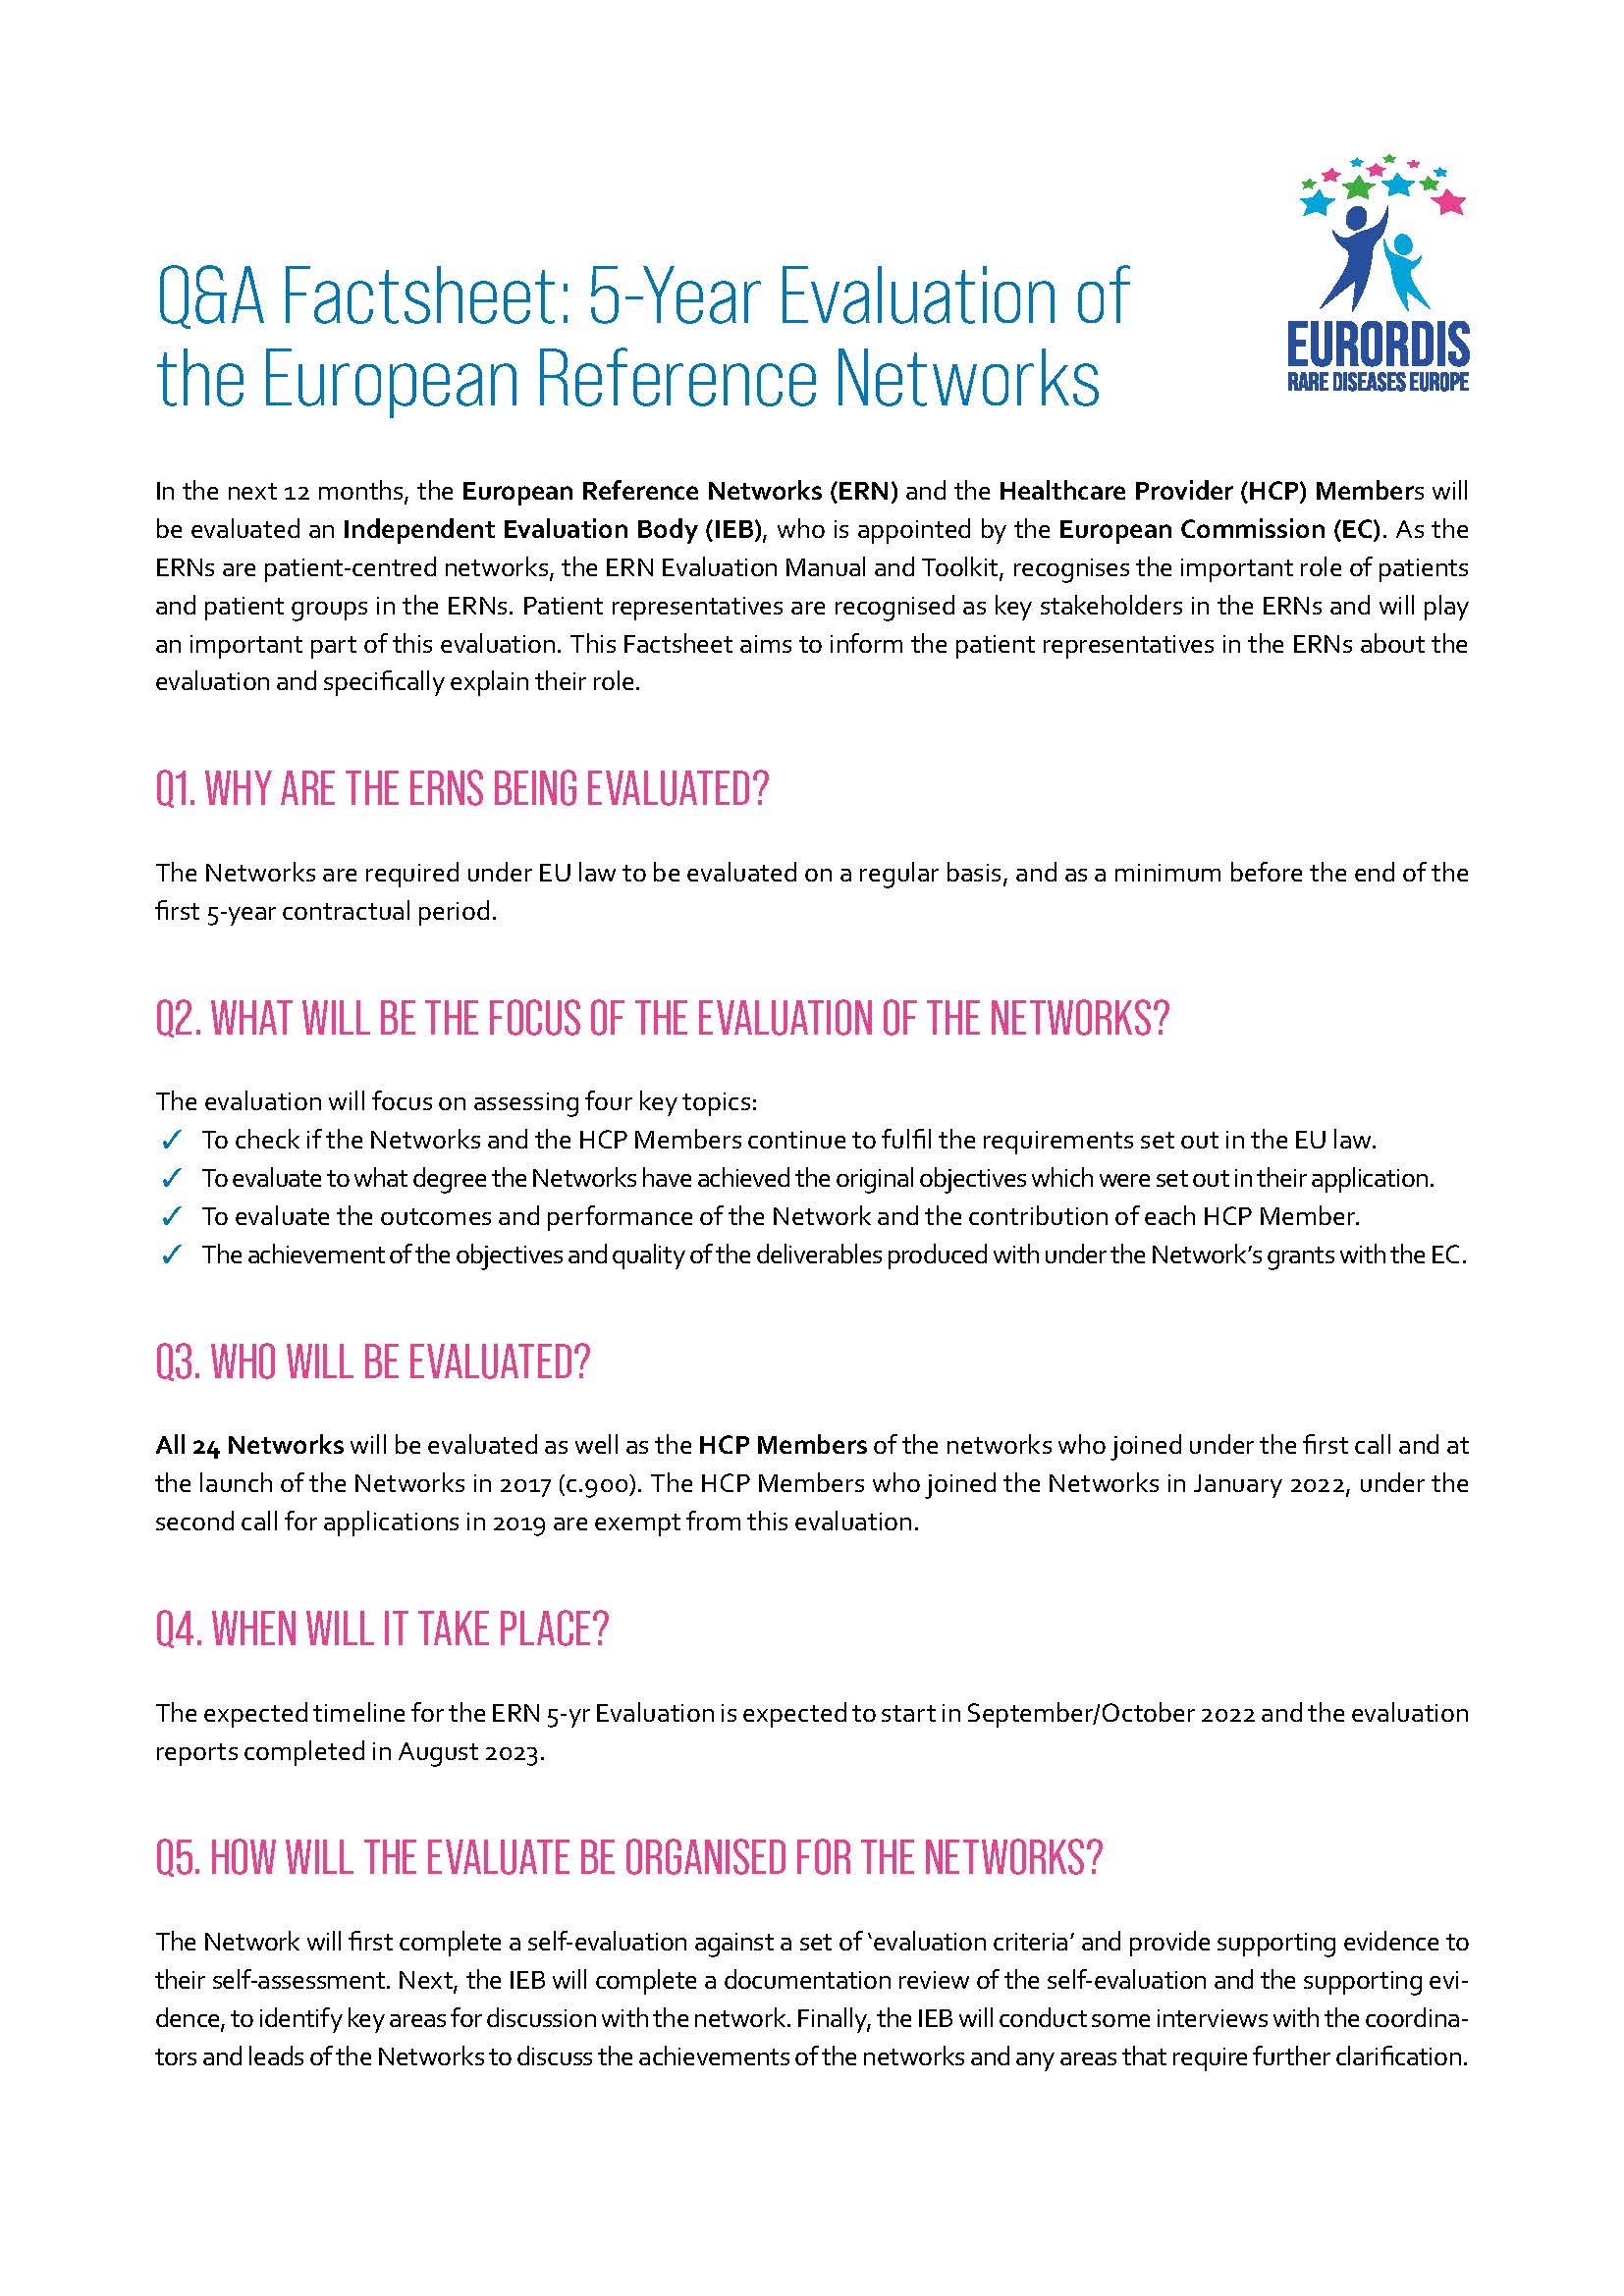 Q&A Factsheet: 5-Year Evaluation of the European Reference Networks